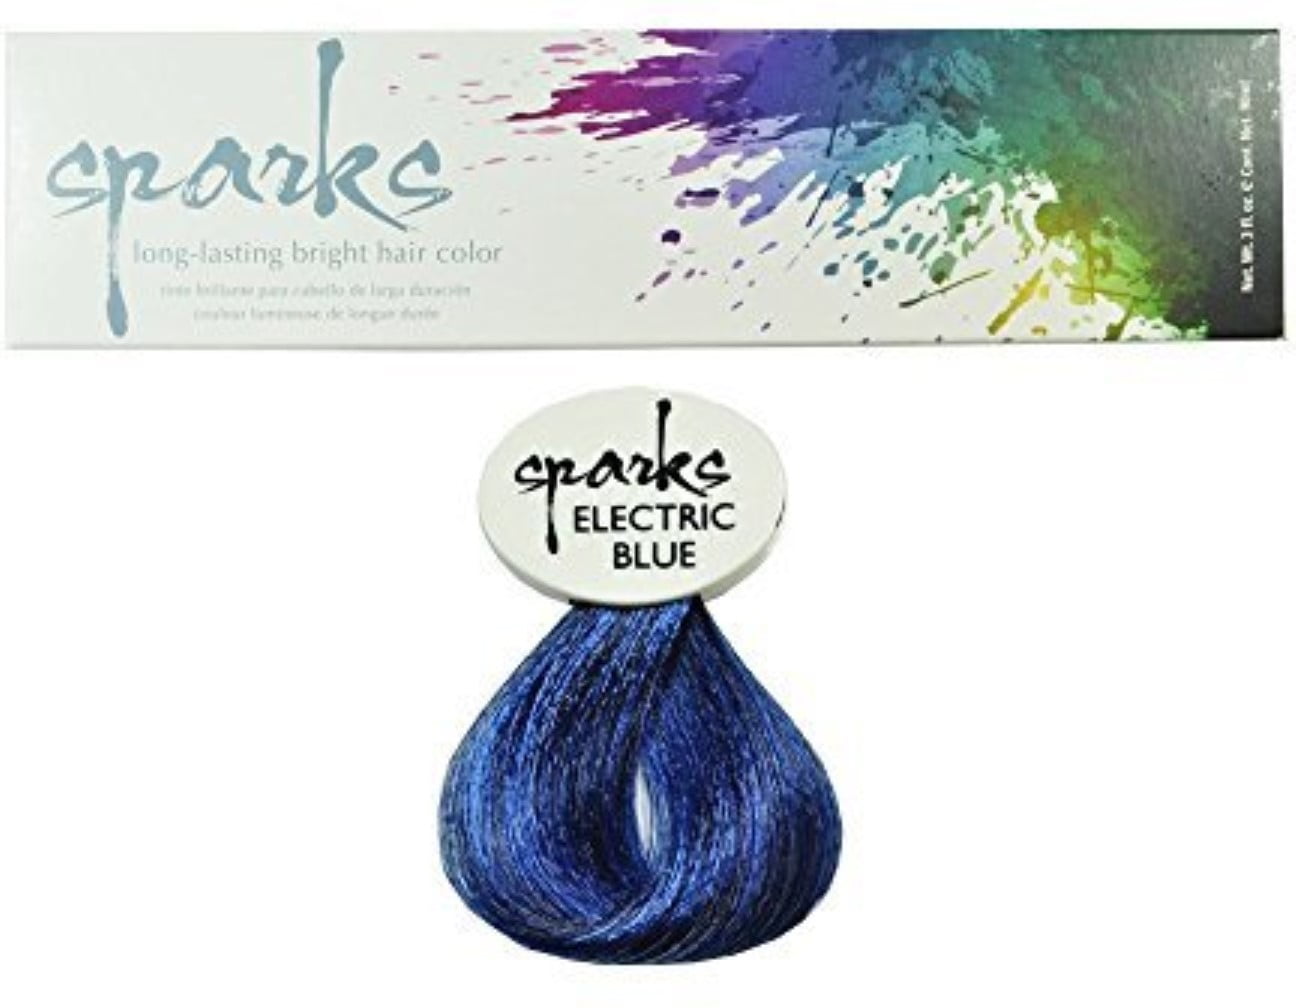 9. "Mercury Blue" Hair Color by Sparks - wide 1